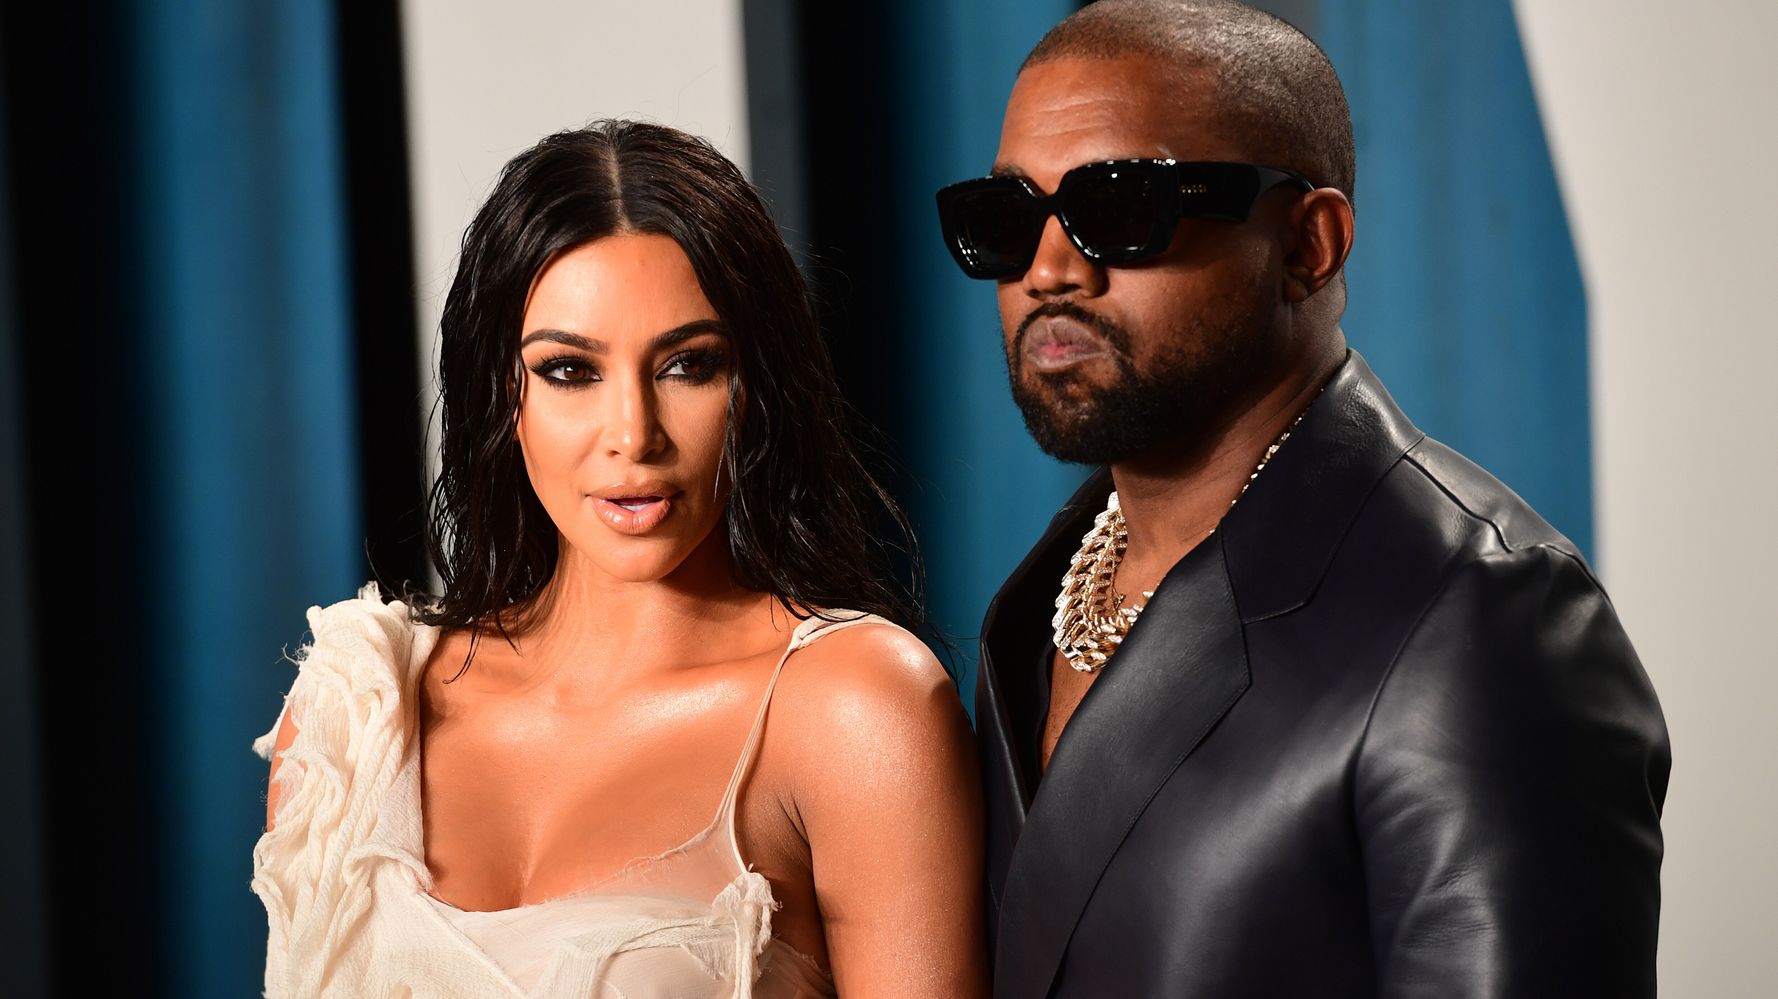 Kim Kardashian Appears At Kanye West's 'Donda' Event In Wedding Gown